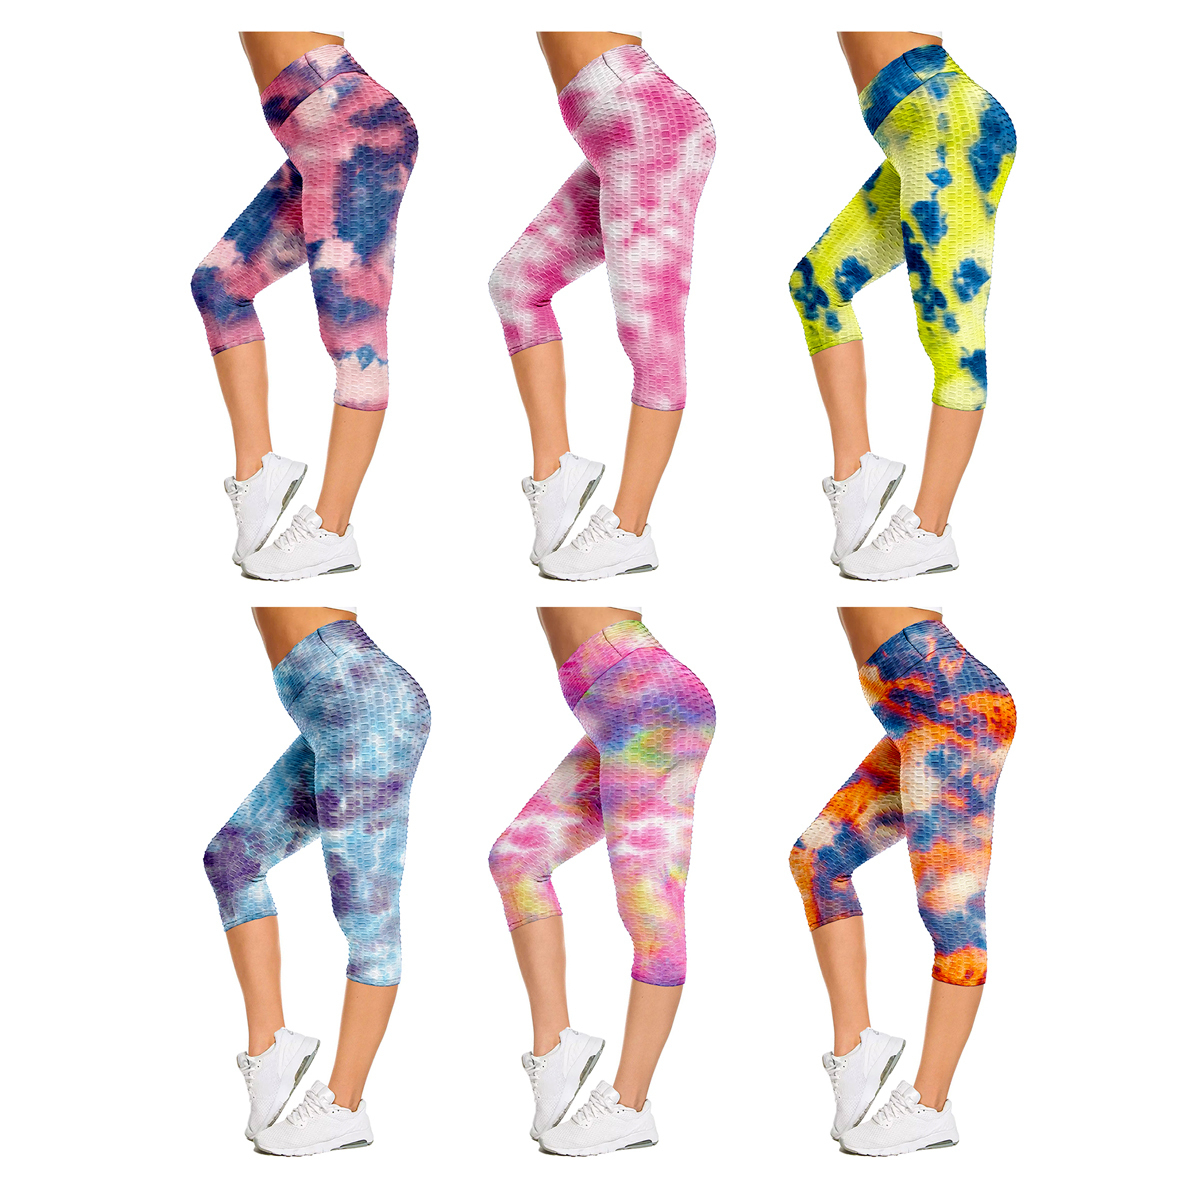 3-Pack: Women's High Waisted Anti Cellulite Leggings (Butt Lifting) - Tie-Dye, Large/X-Large